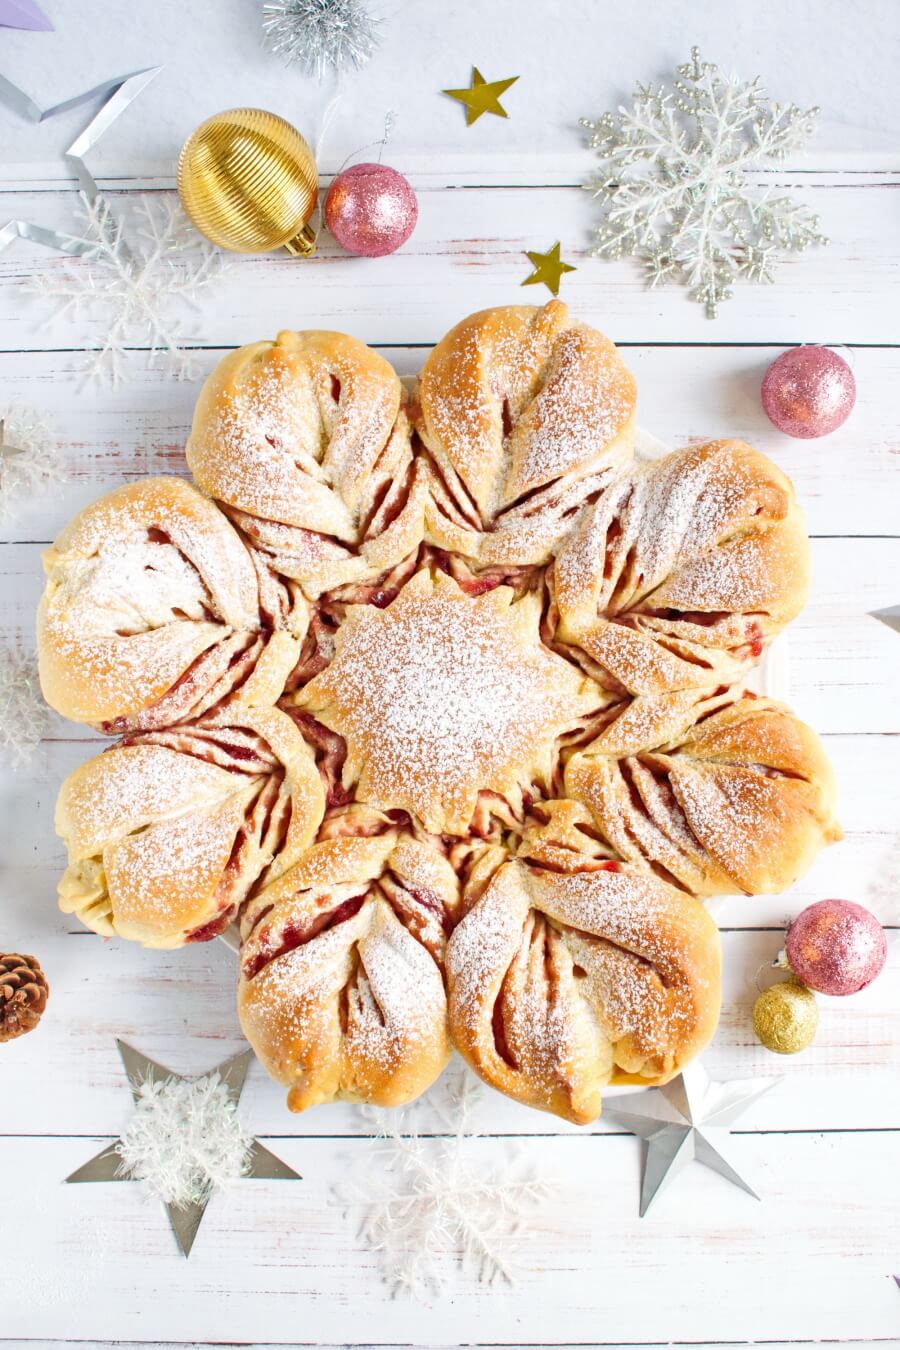 Christmas Star Twisted Bread Recipe - Cook.me Recipes